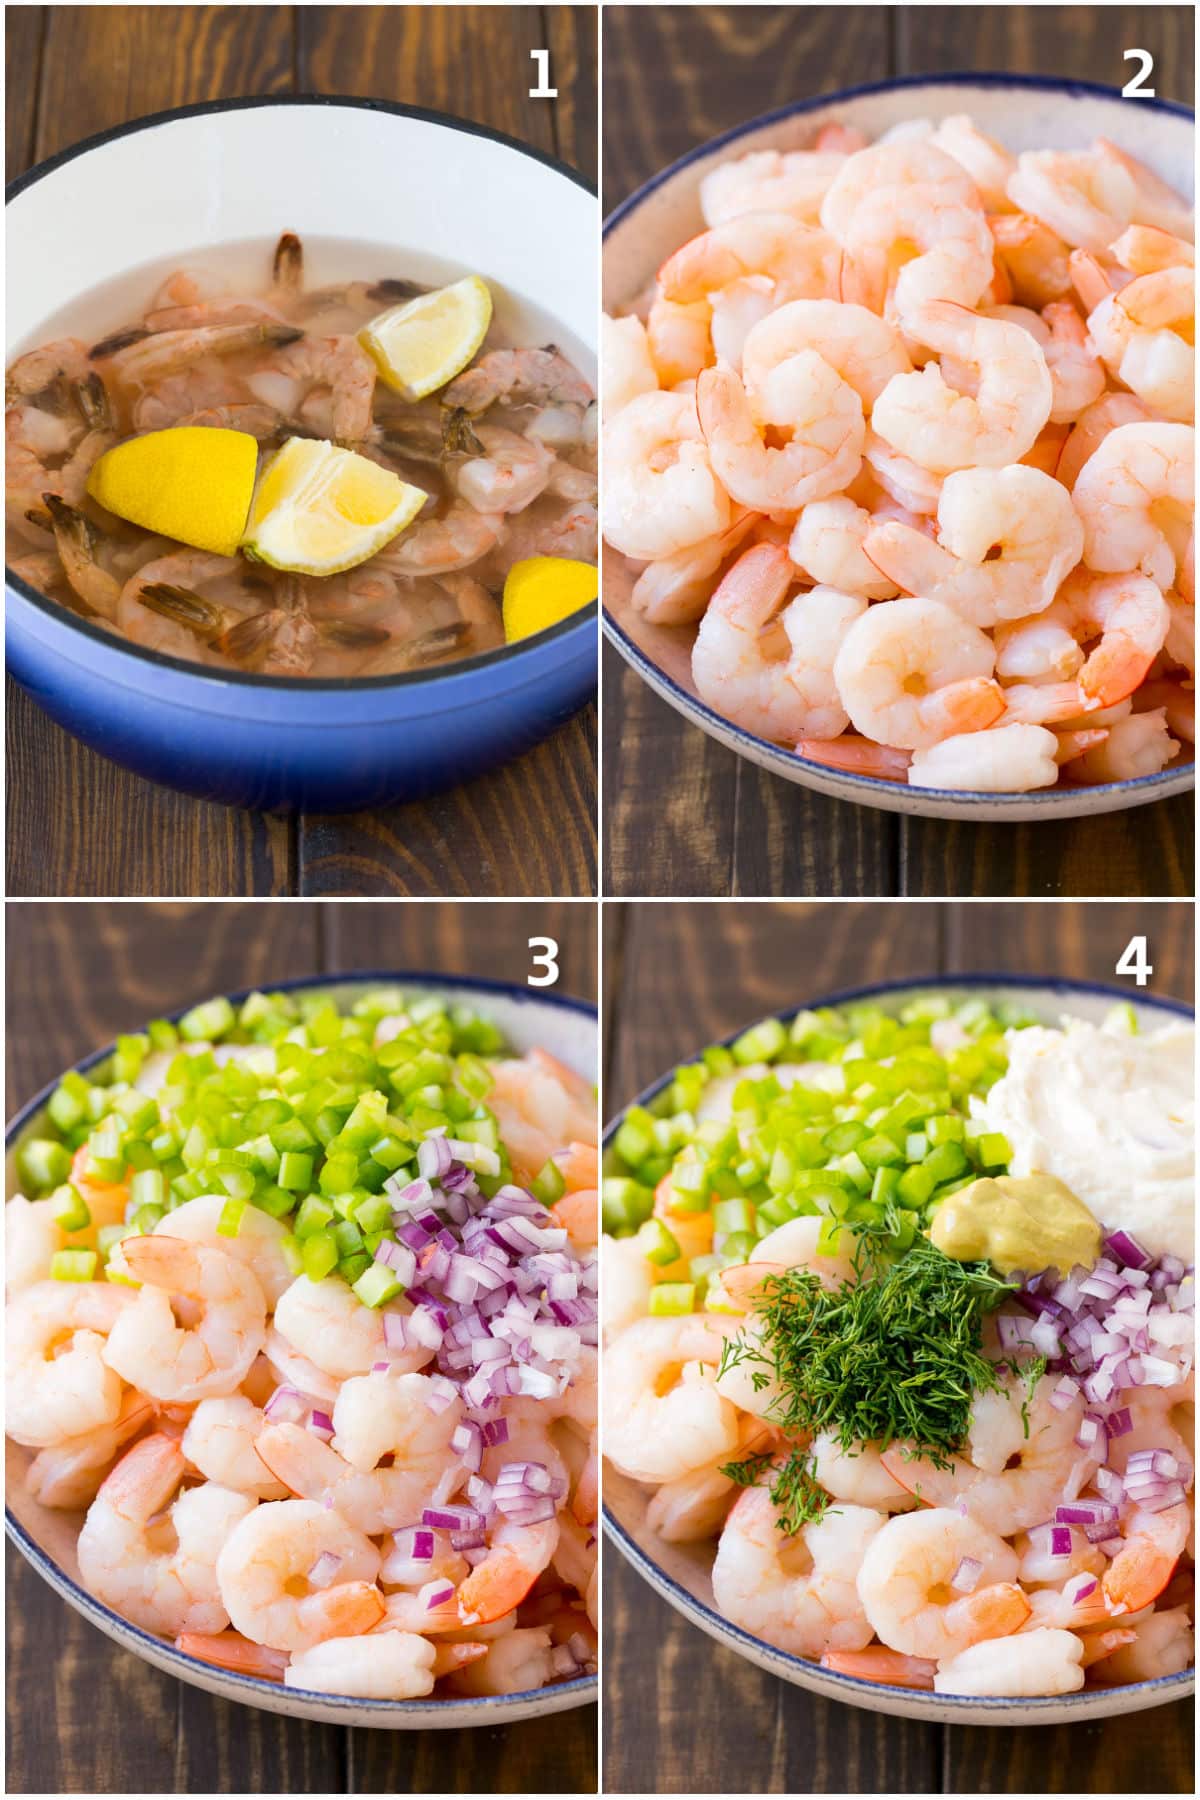 Step by step process shots showing how to make shrimp salad.